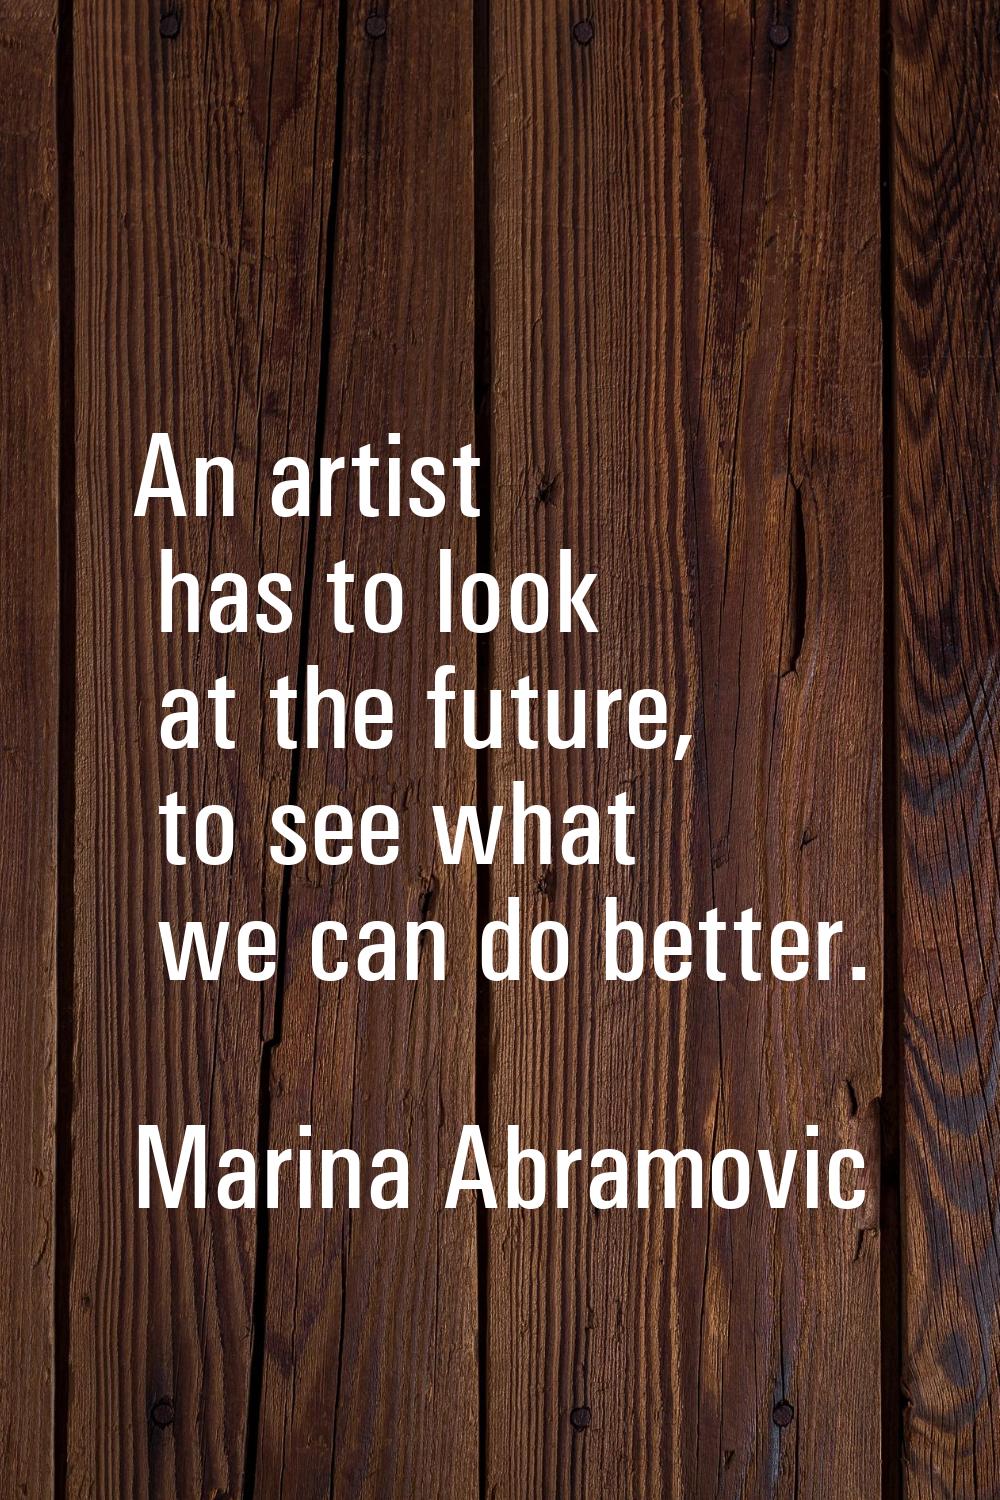 An artist has to look at the future, to see what we can do better.